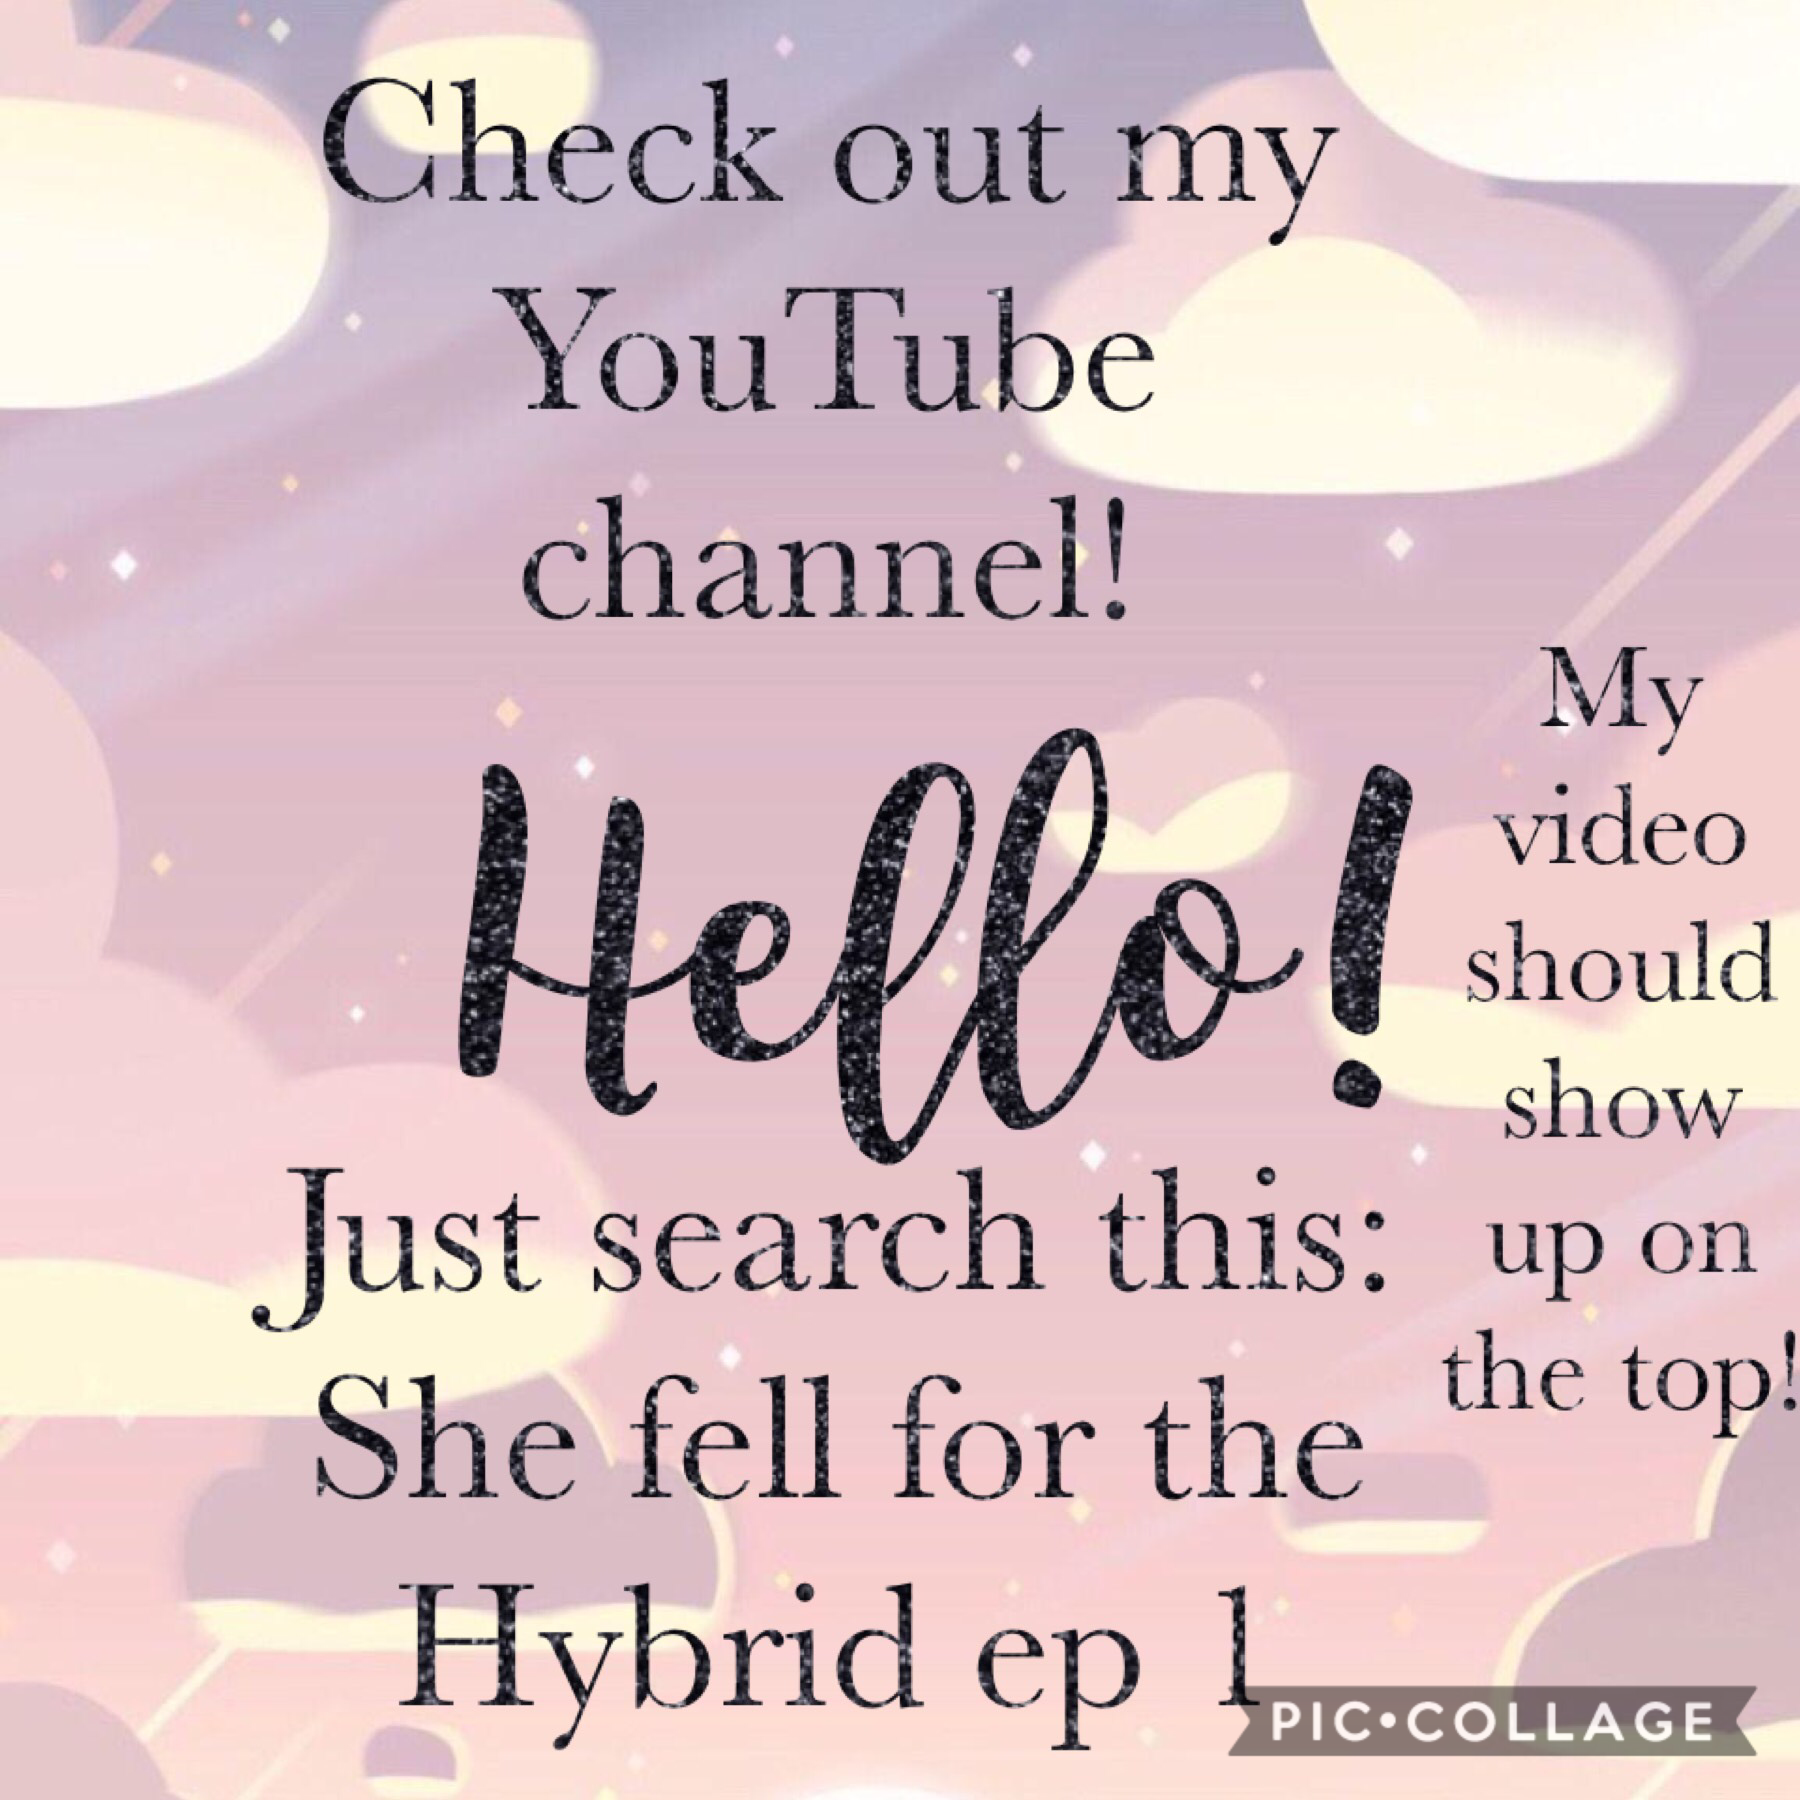 Check out my YouTube channel’